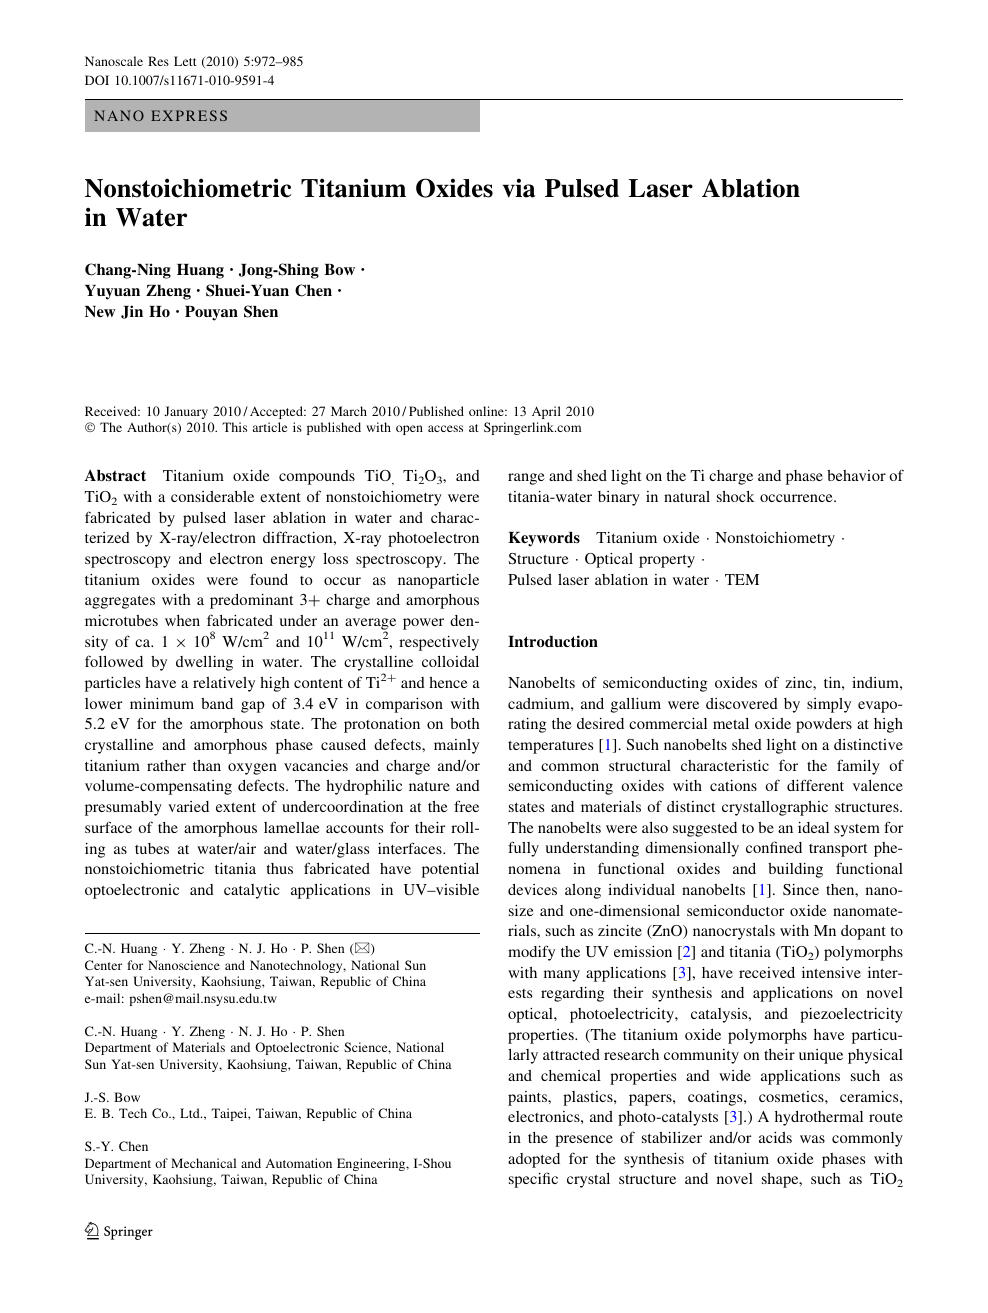 Nonstoichiometric Titanium Oxides Via Pulsed Laser Ablation In Water Topic Of Research Paper In Nano Technology Download Scholarly Article Pdf And Read For Free On Cyberleninka Open Science Hub